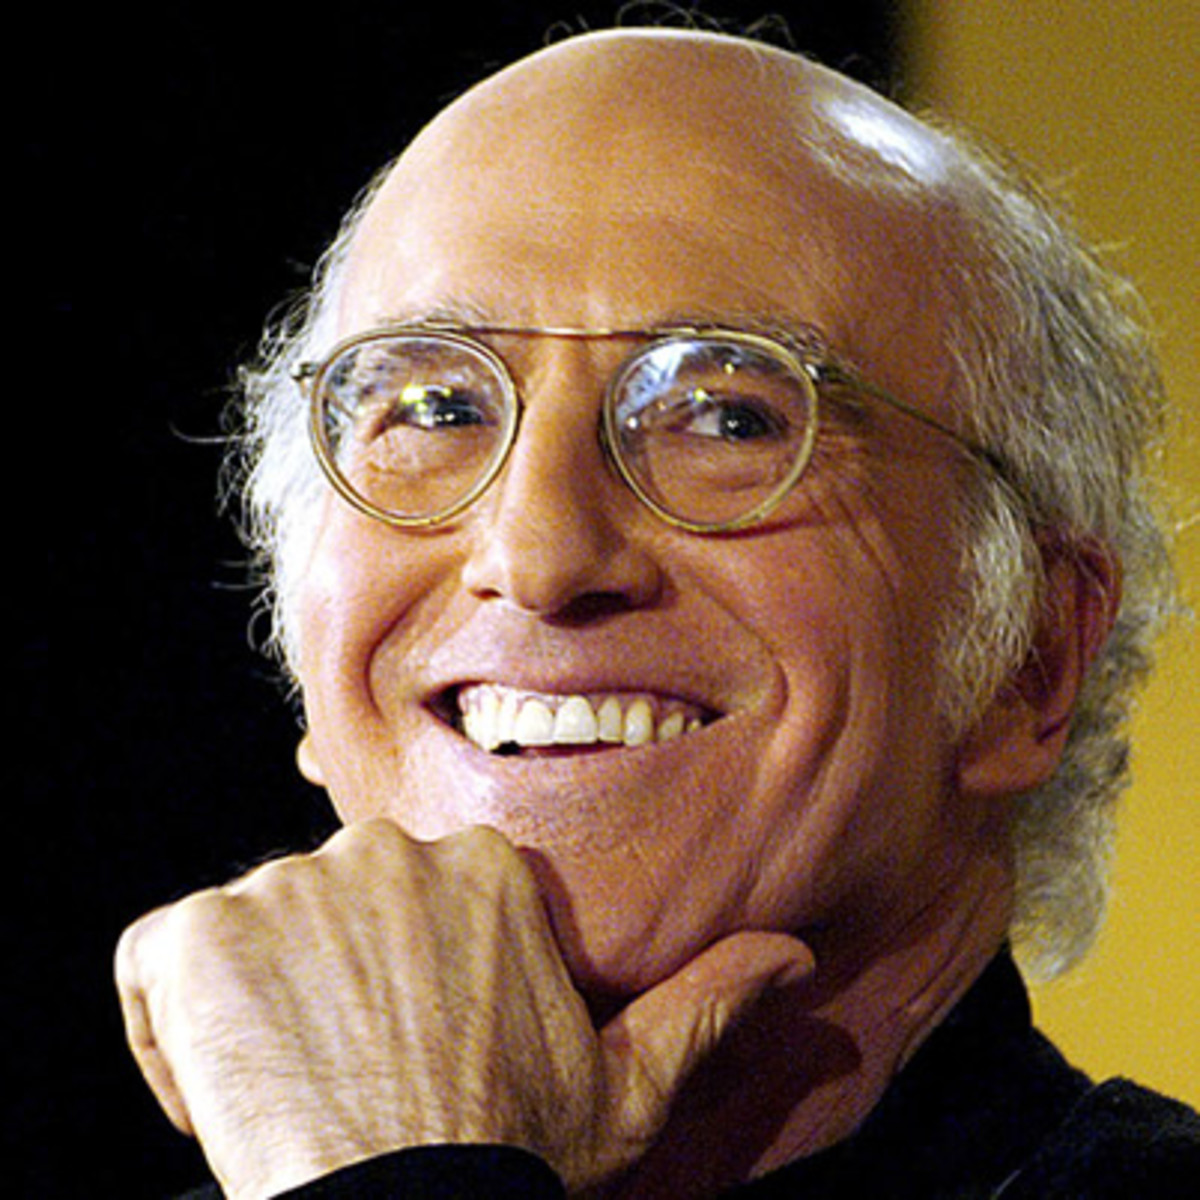 How tall is Larry David?